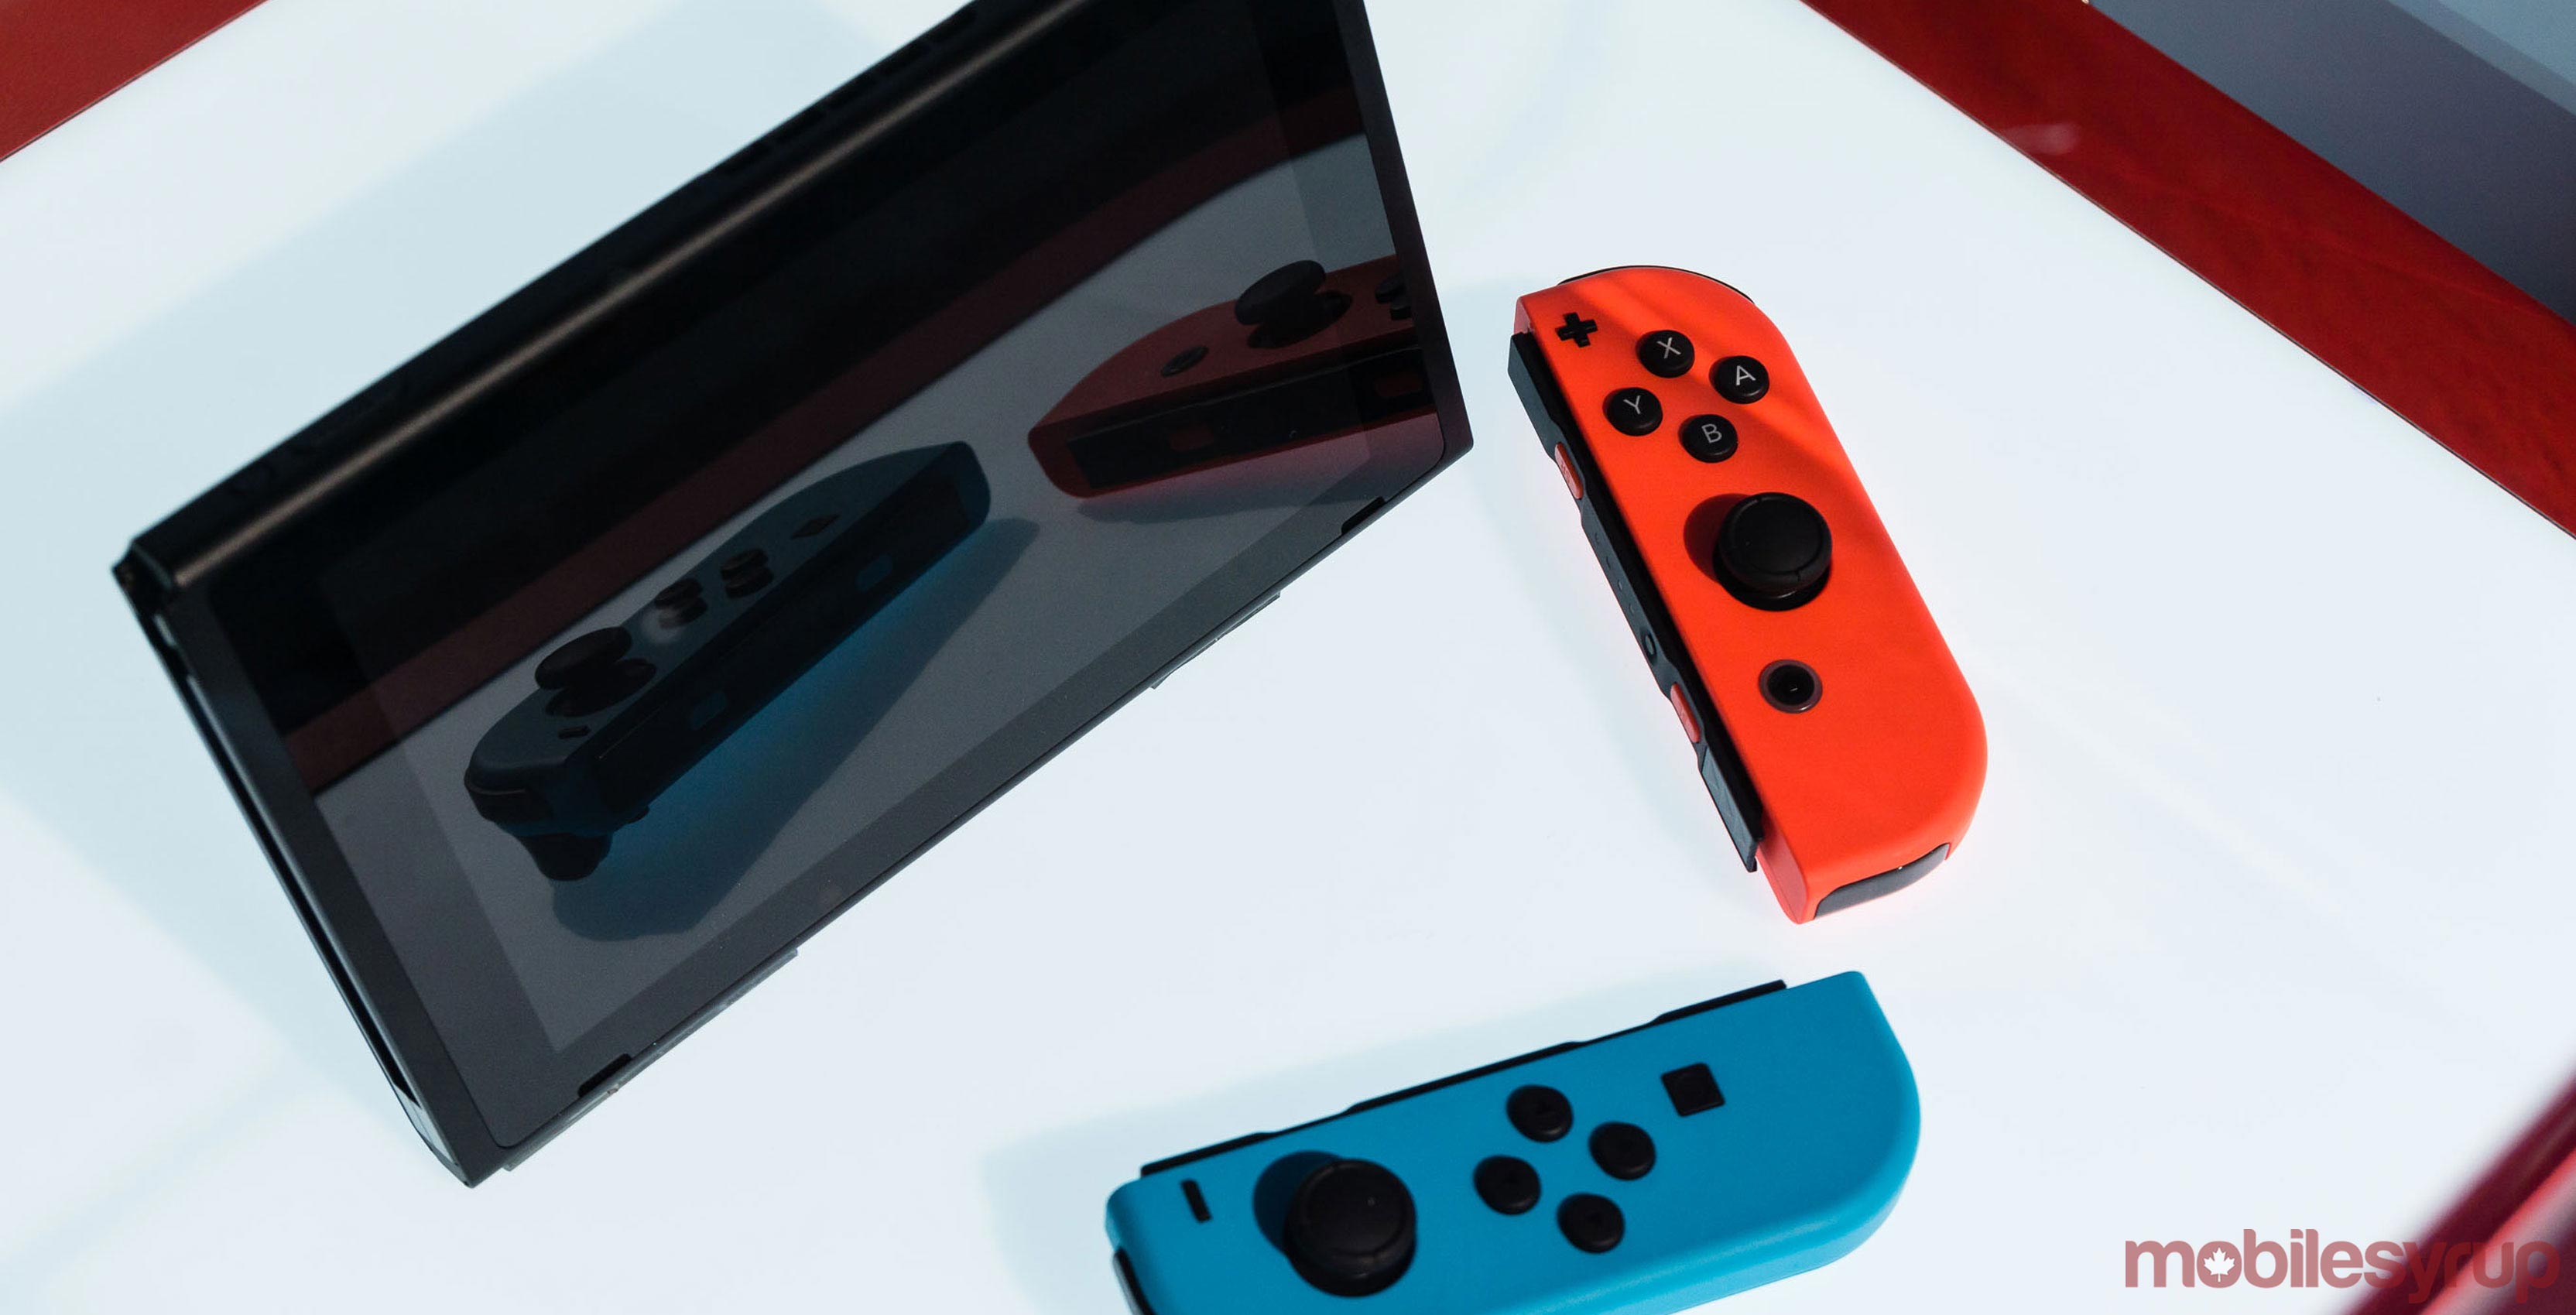 Image of Nintendo Switch and Joy-Con controllers - official Switch unboxing